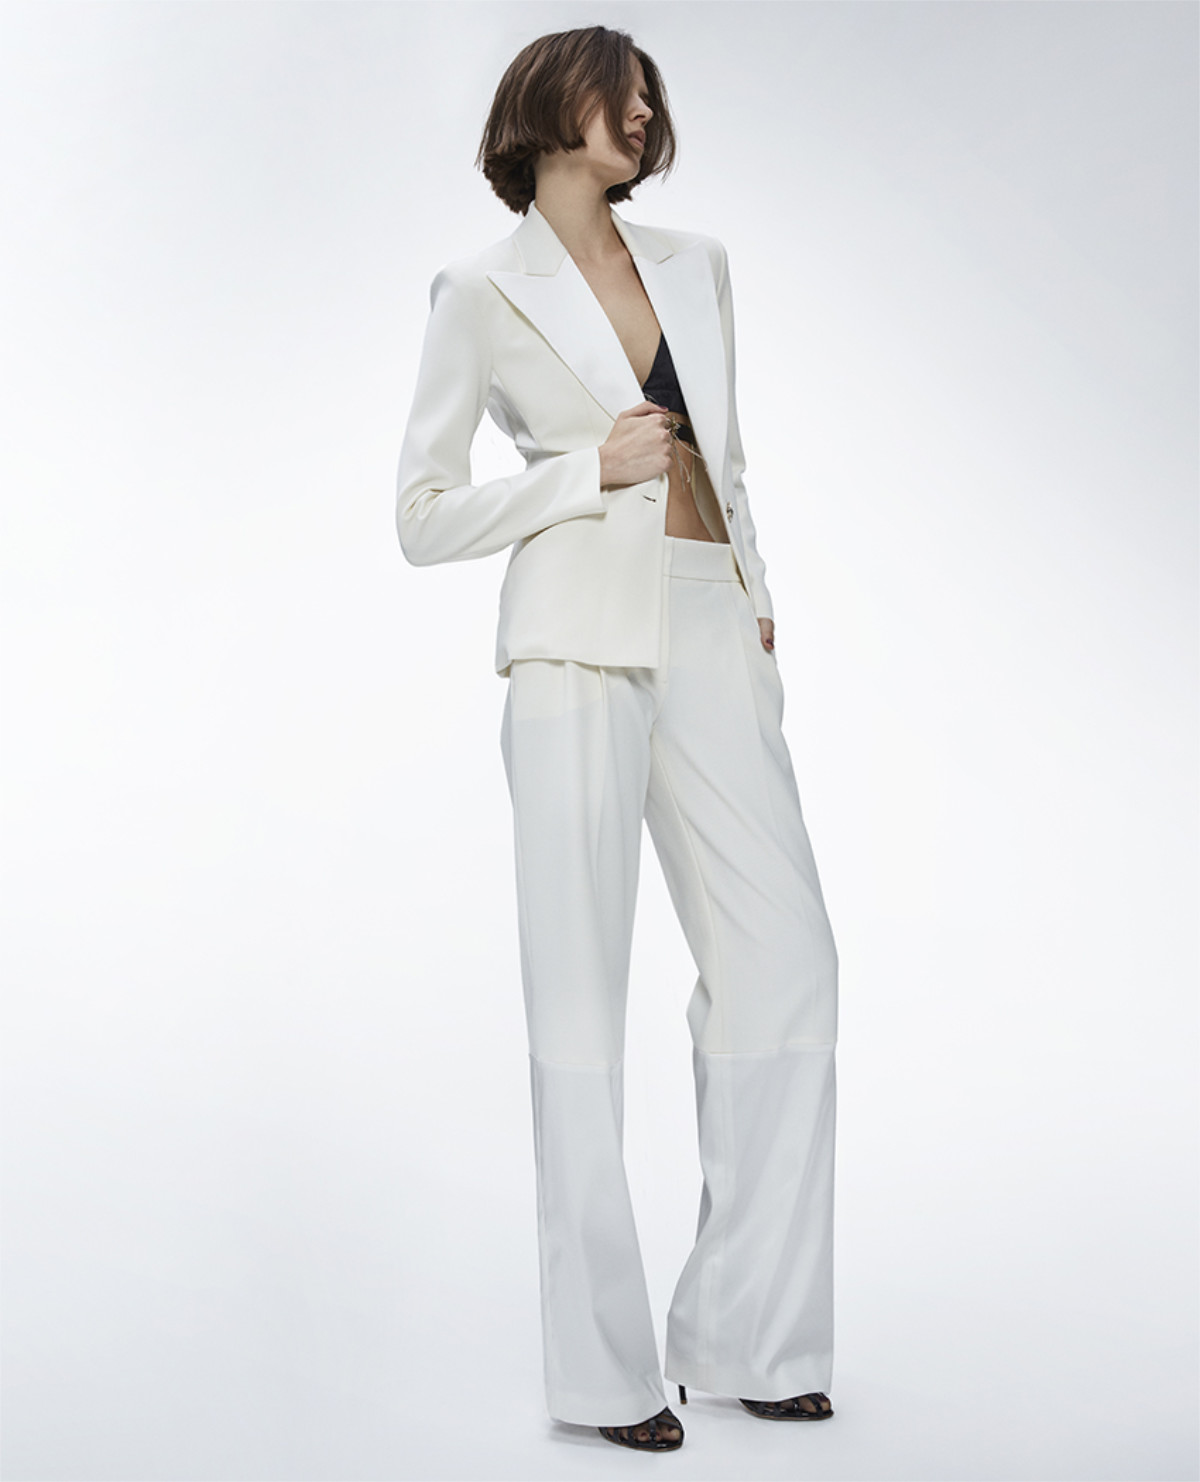 Genny Presents Its New Pre-fall 2023 Collection: Urban Tuxedo